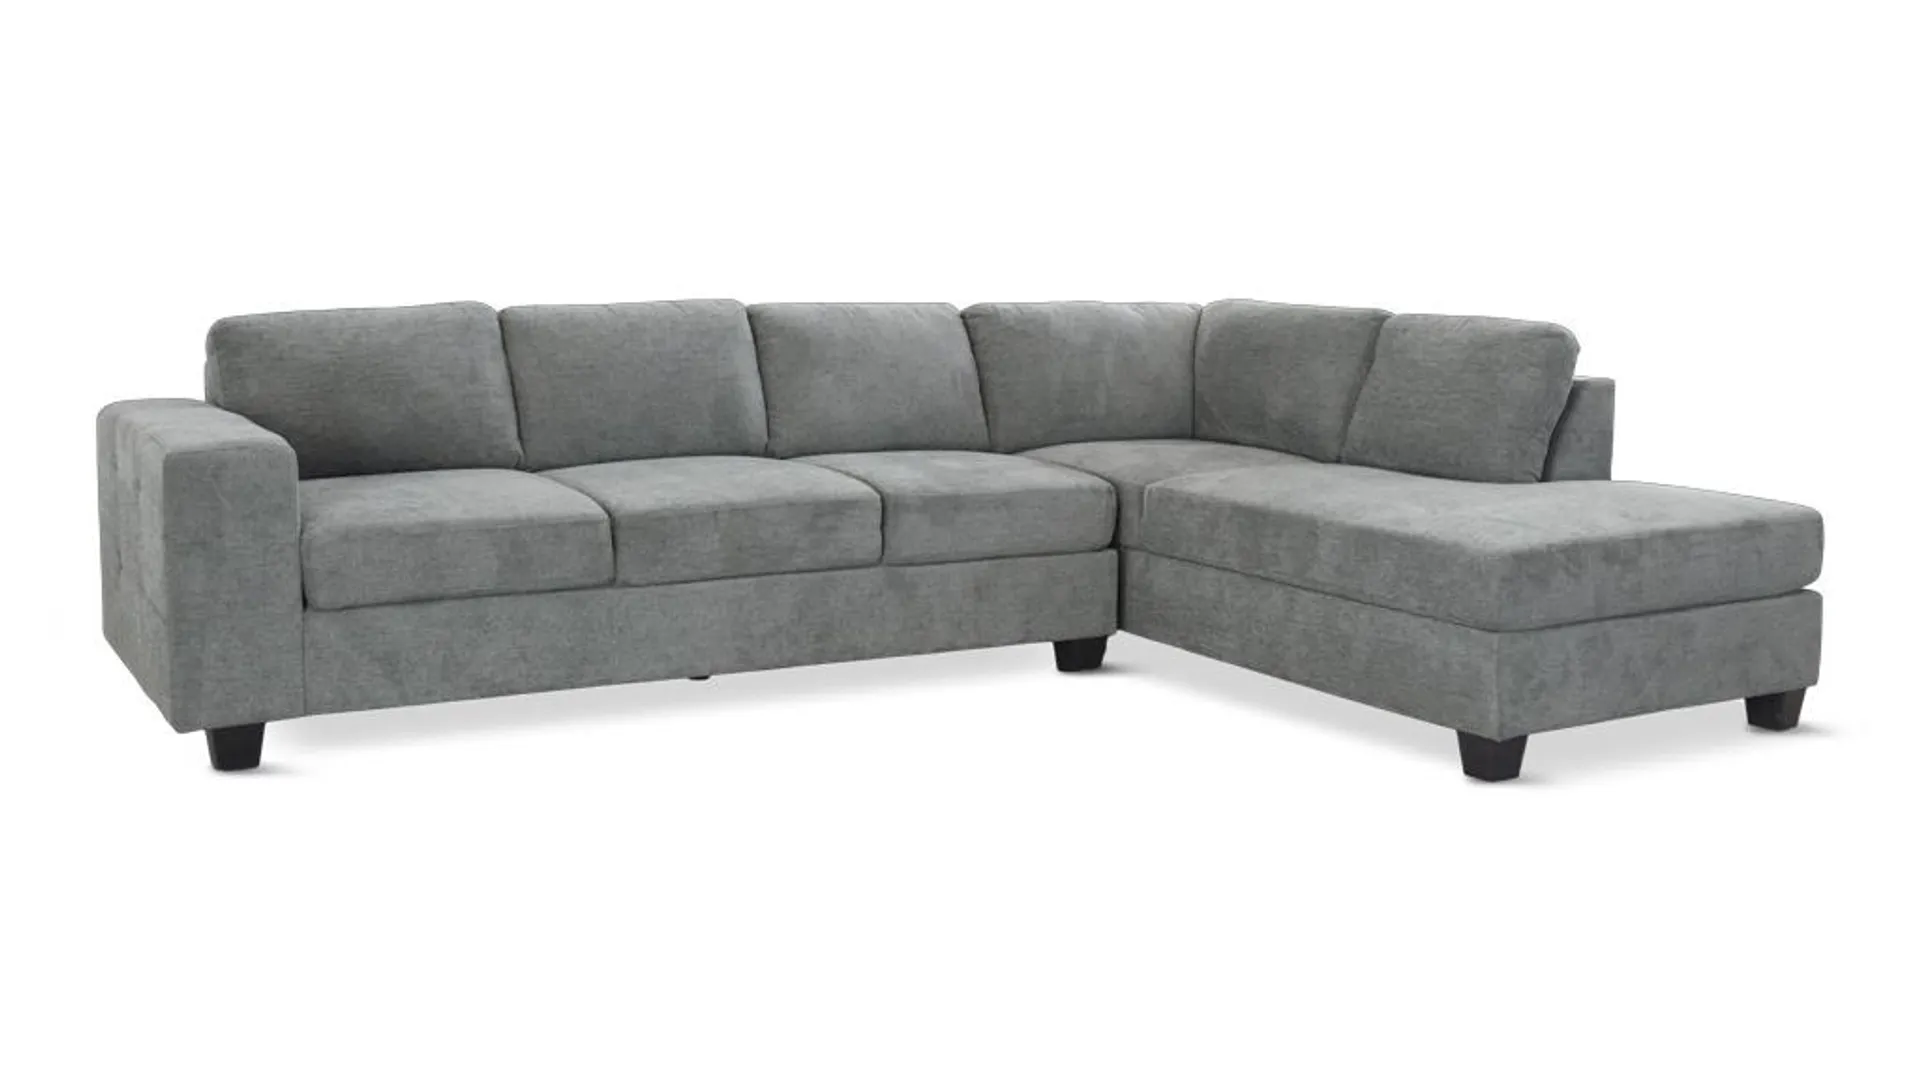 4 Seater RHF Chaise